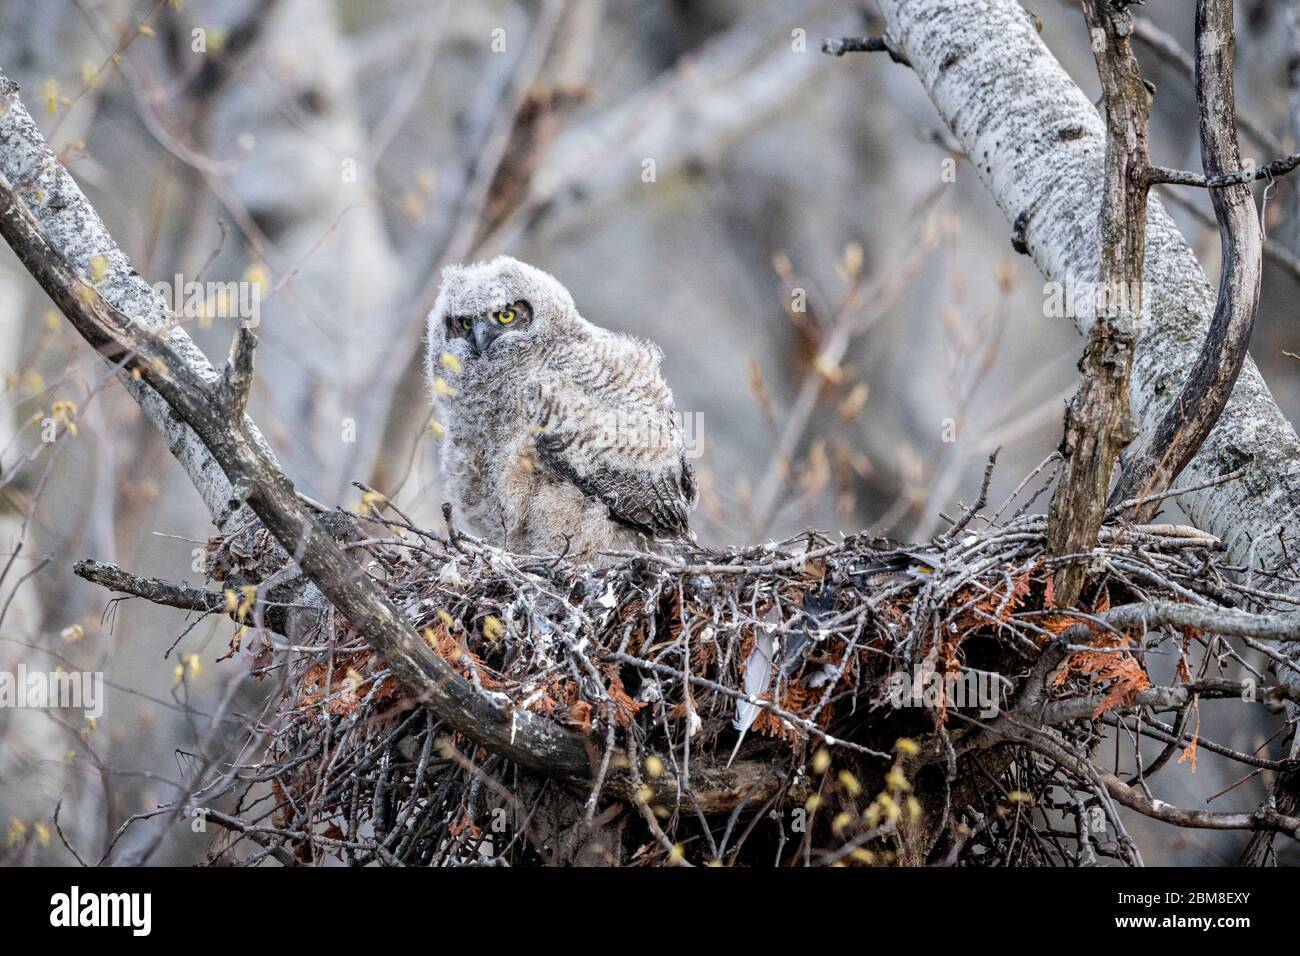 A wild nestling Great Horned Owlet (Bubo Virginianus), approximately 3-4 weeks old, part of the Strigiformes order, and Strigidae family. Stock Photo